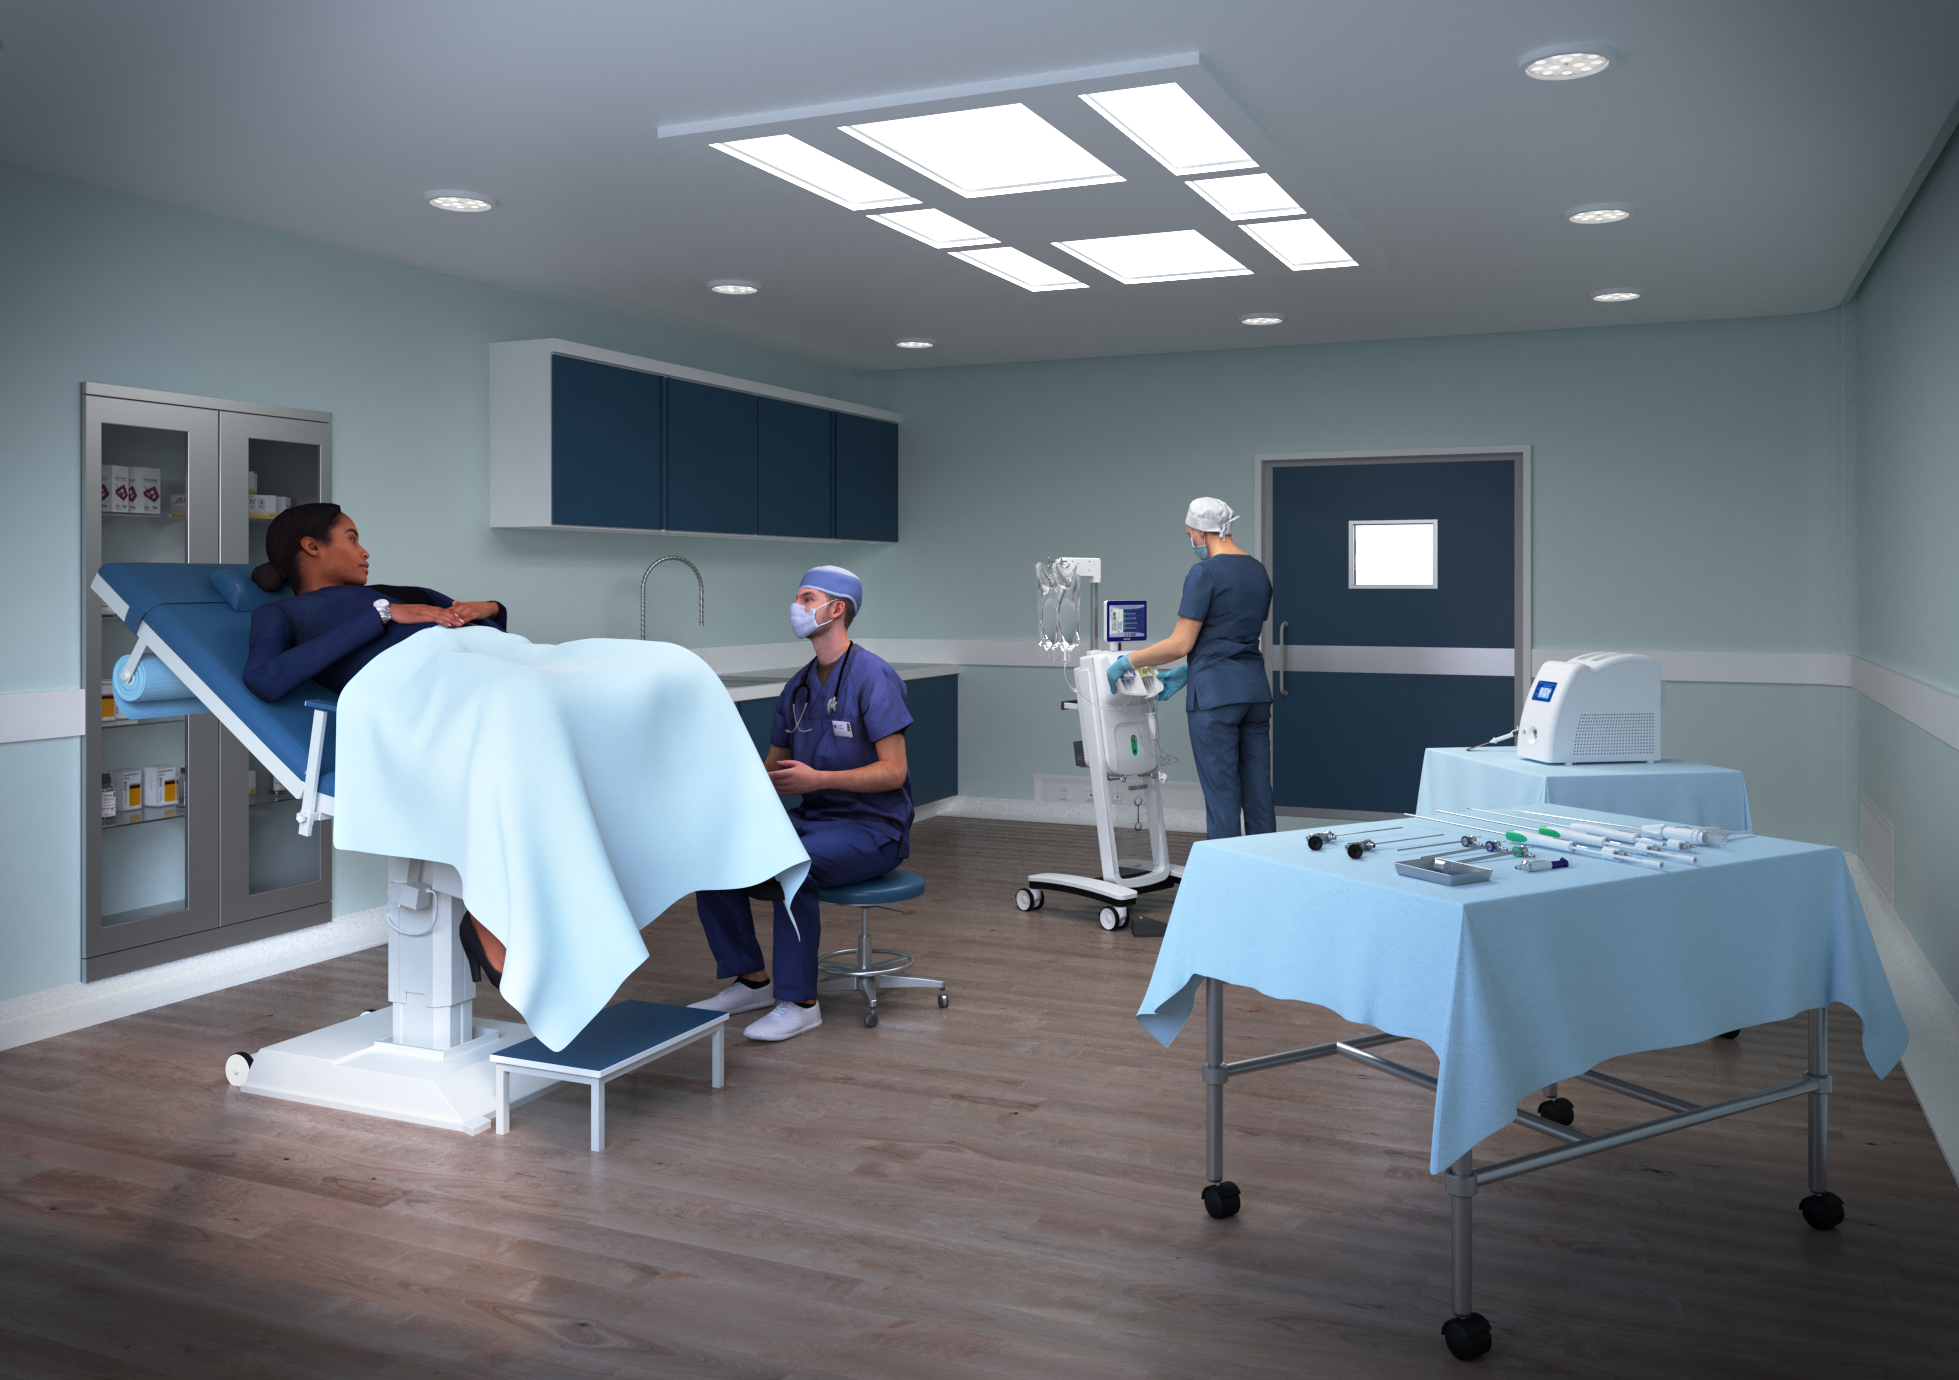 Animated virtual hospital in an outpatient setting with one patient and two doctors